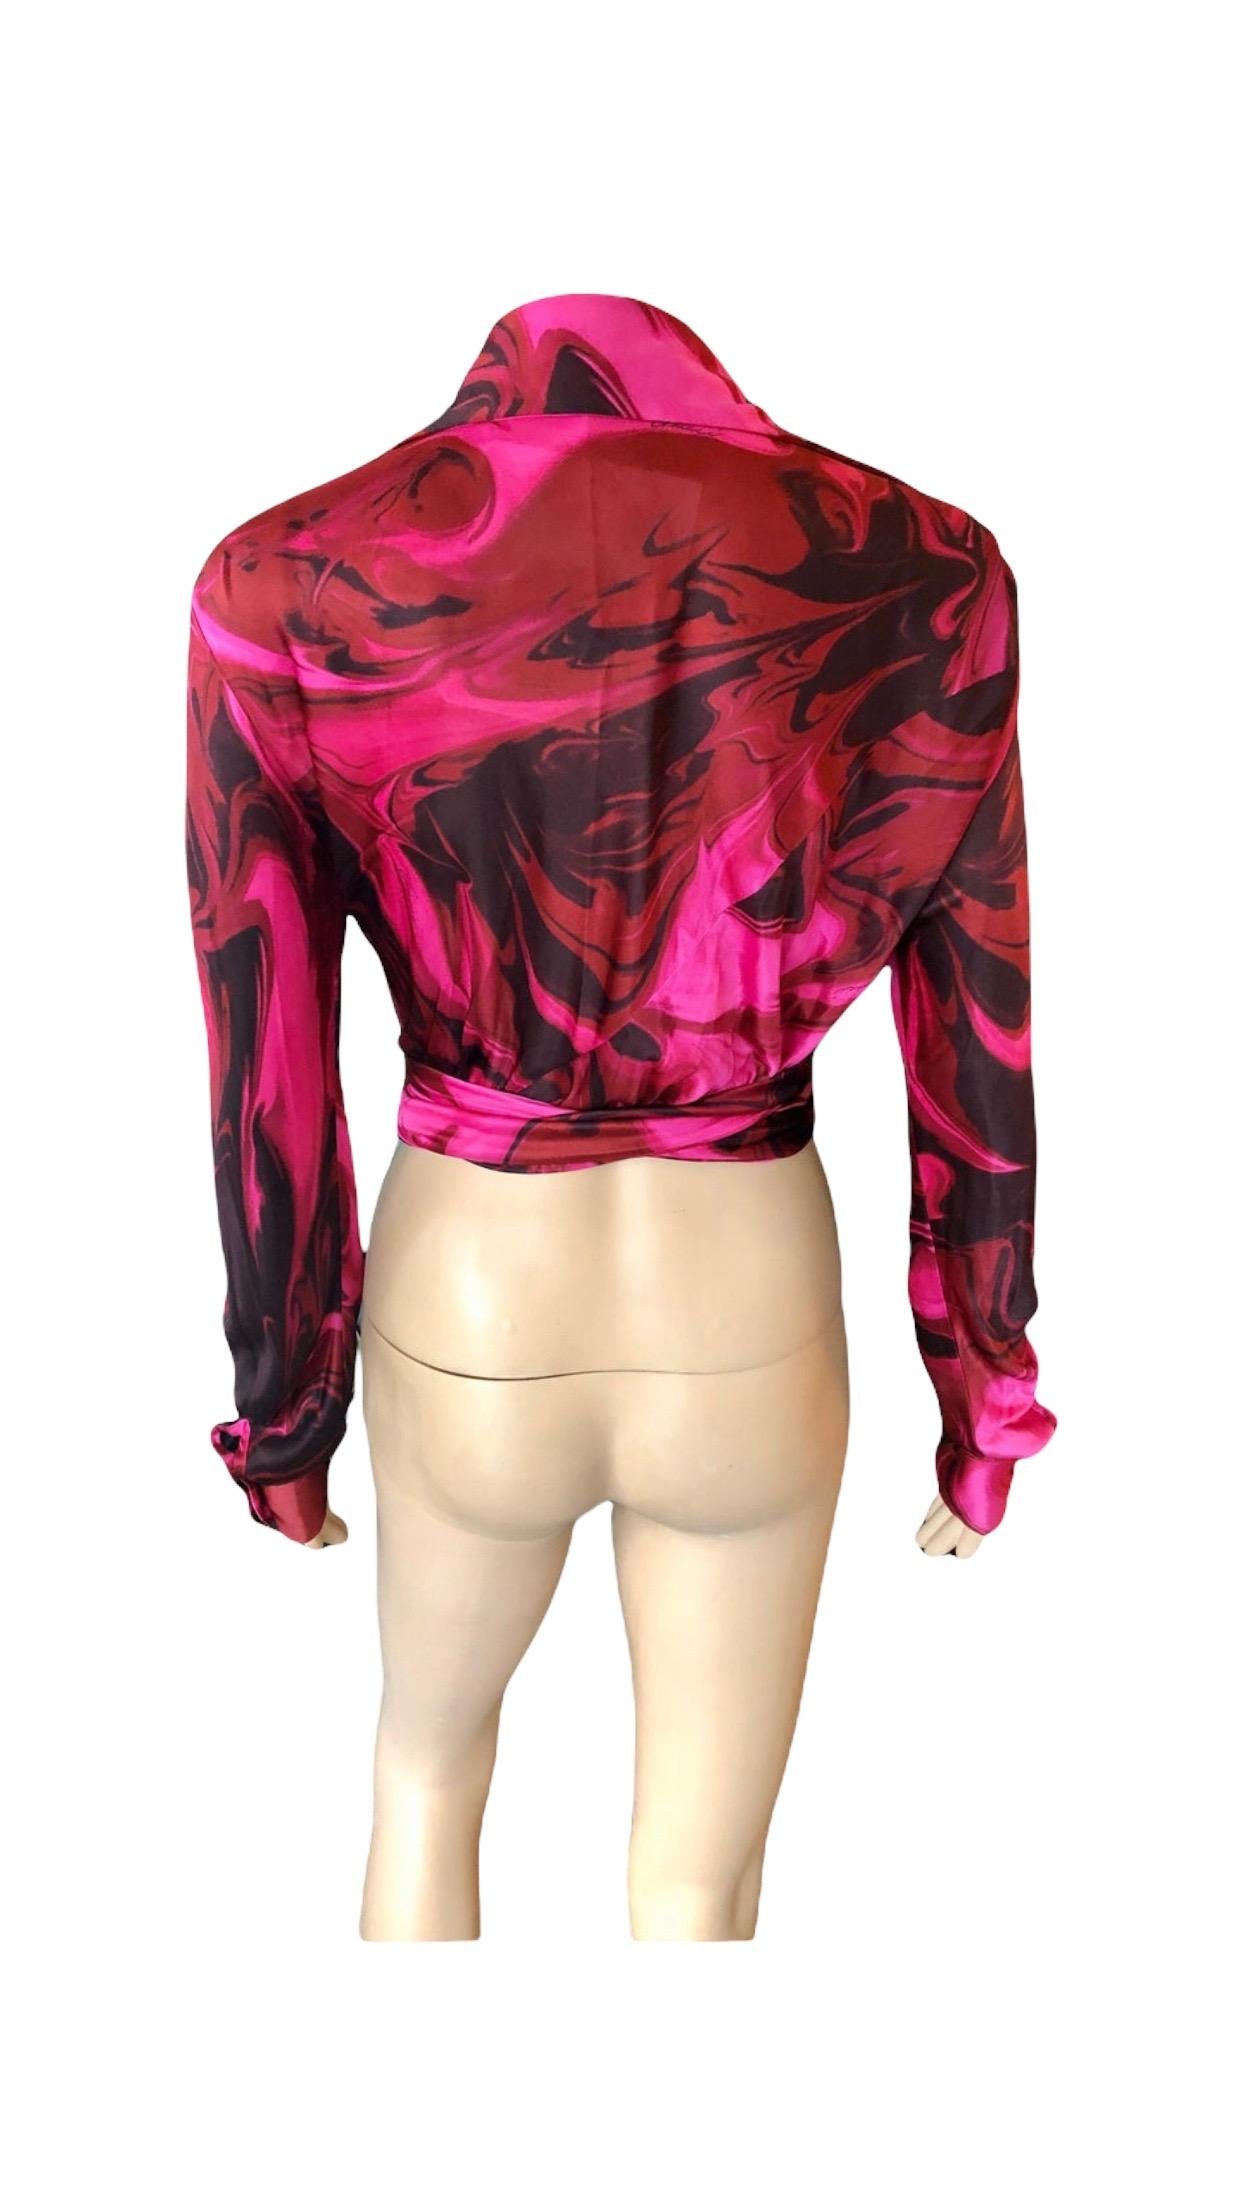 Tom Ford for Gucci S/S 2001 Plunging Neckline Wrap Crop Top Blouse  For Sale 4